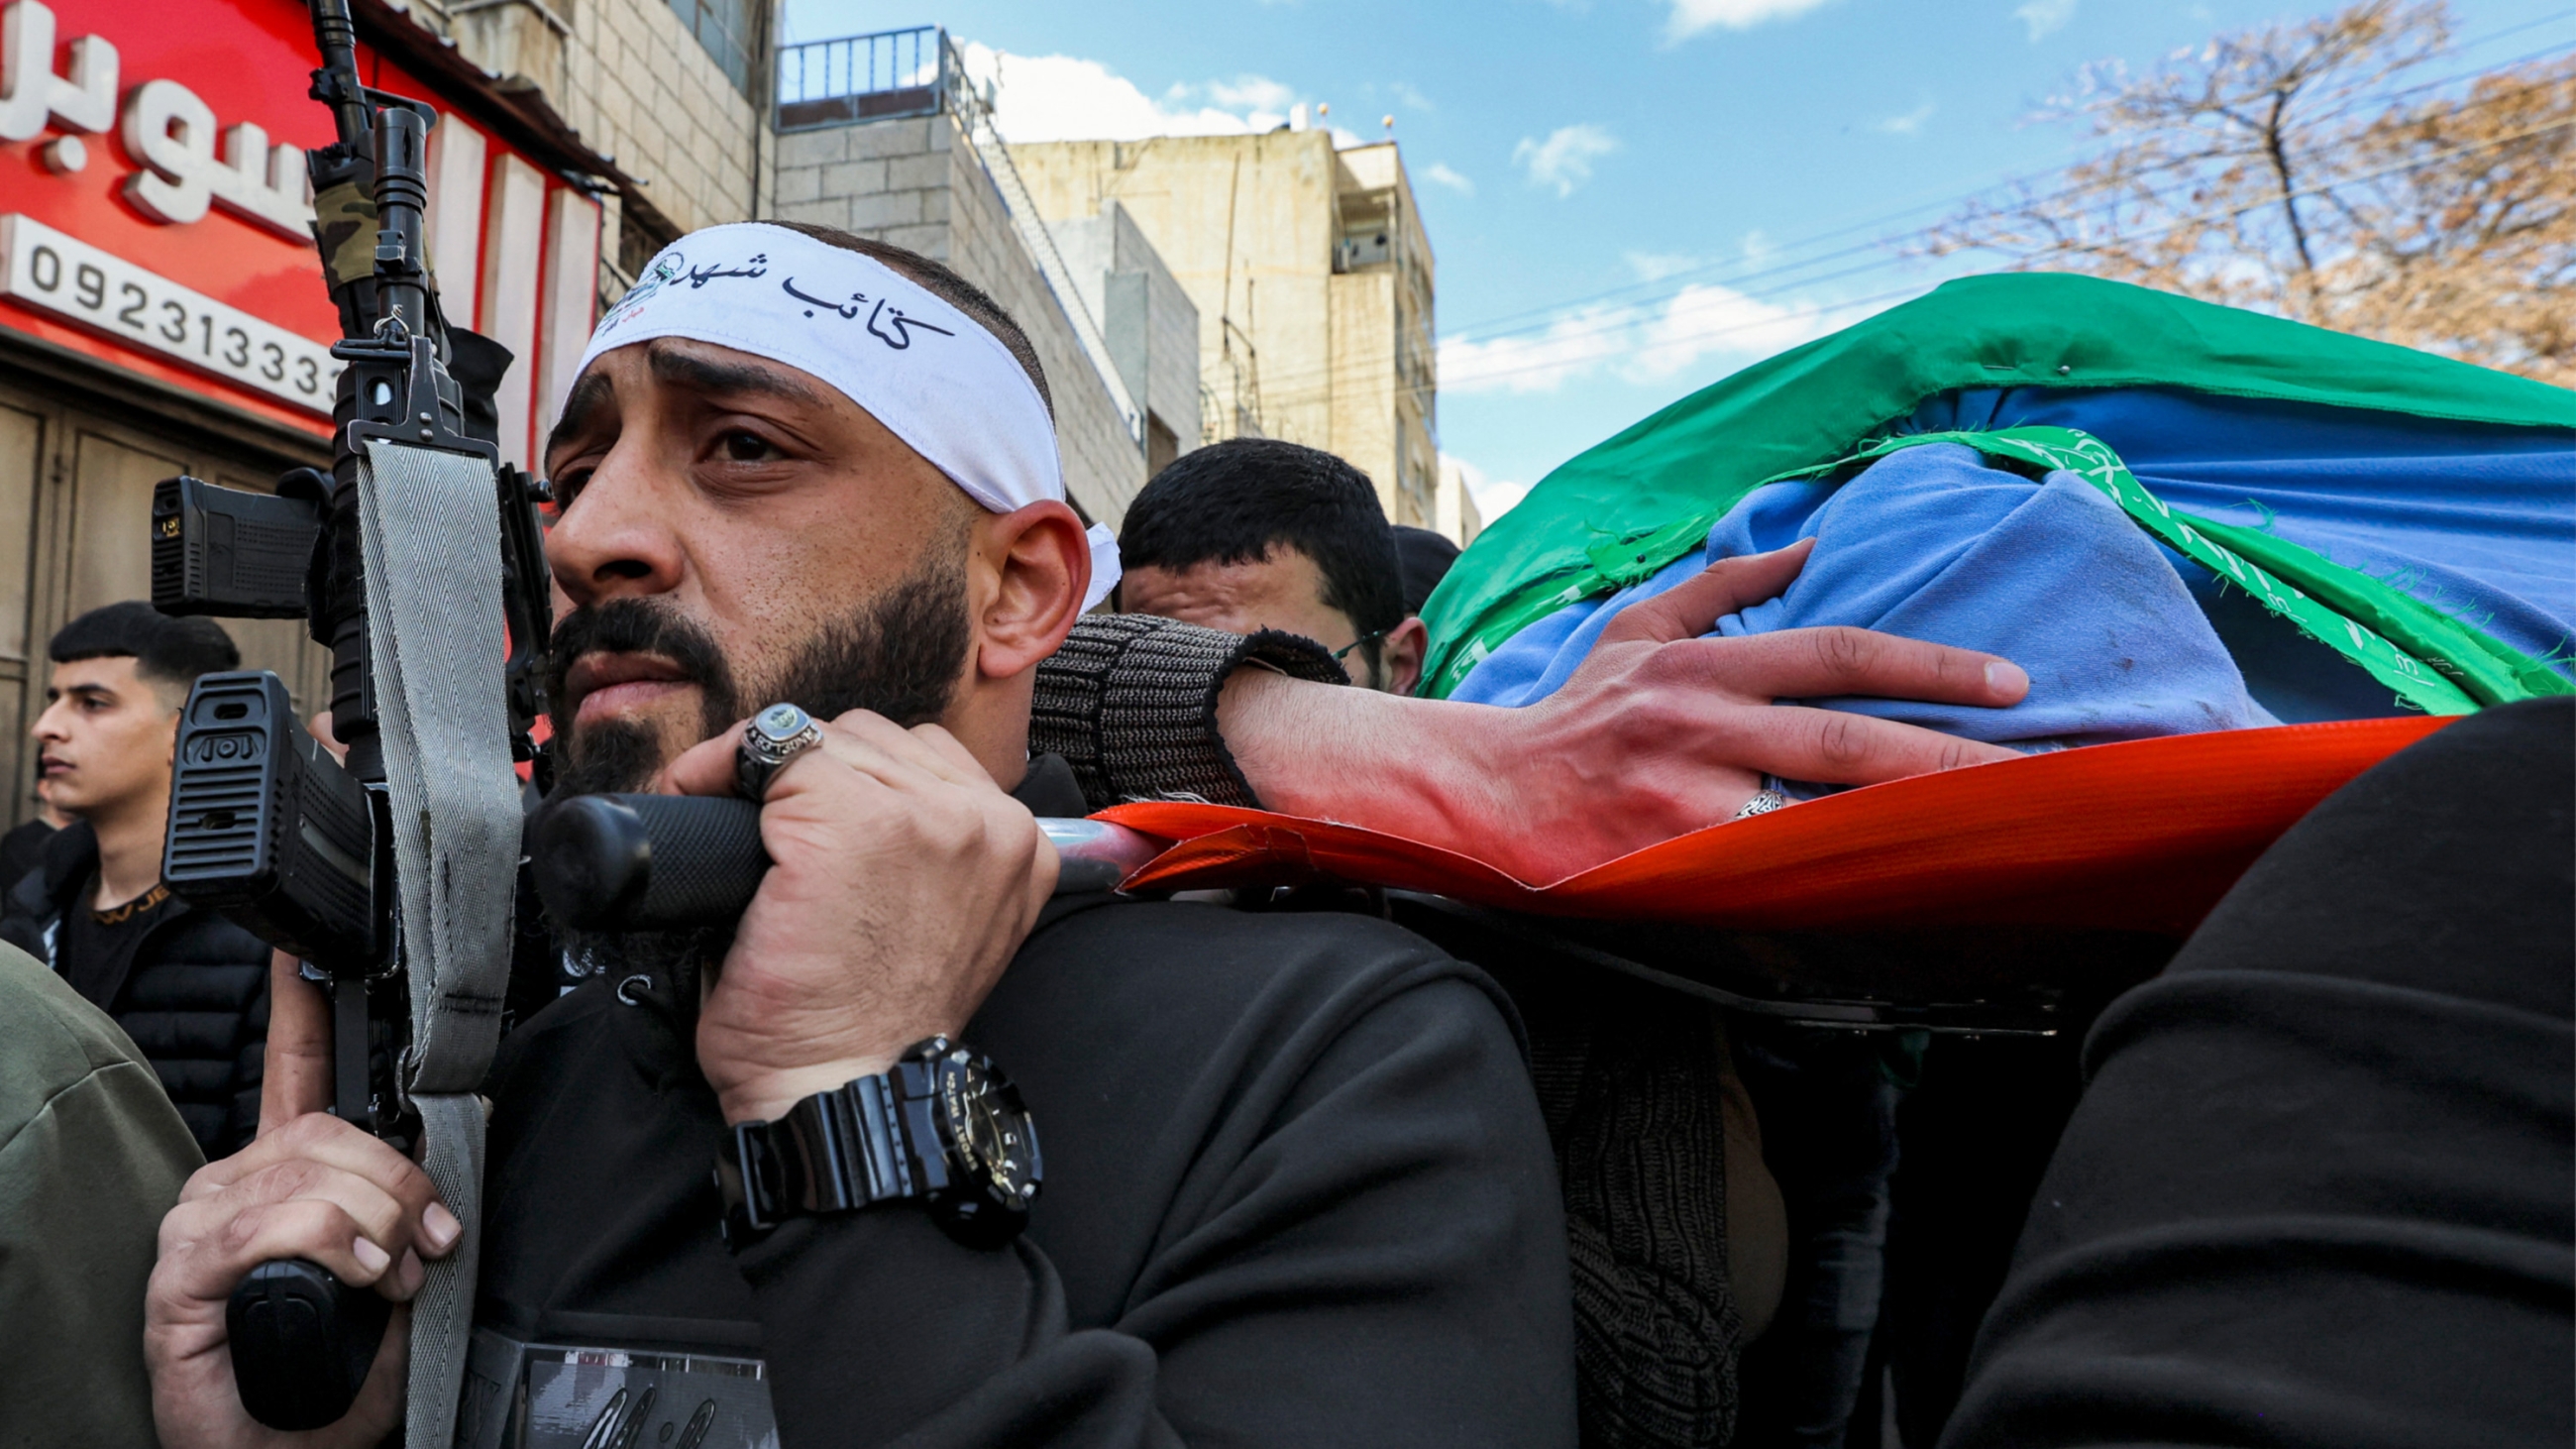 Mourners march with the body of Abdel Fatah Hussein Khroushah, 49, who was killed in an Israeli raid on Jenin refugee camp, 8 March 2023 (AFP)